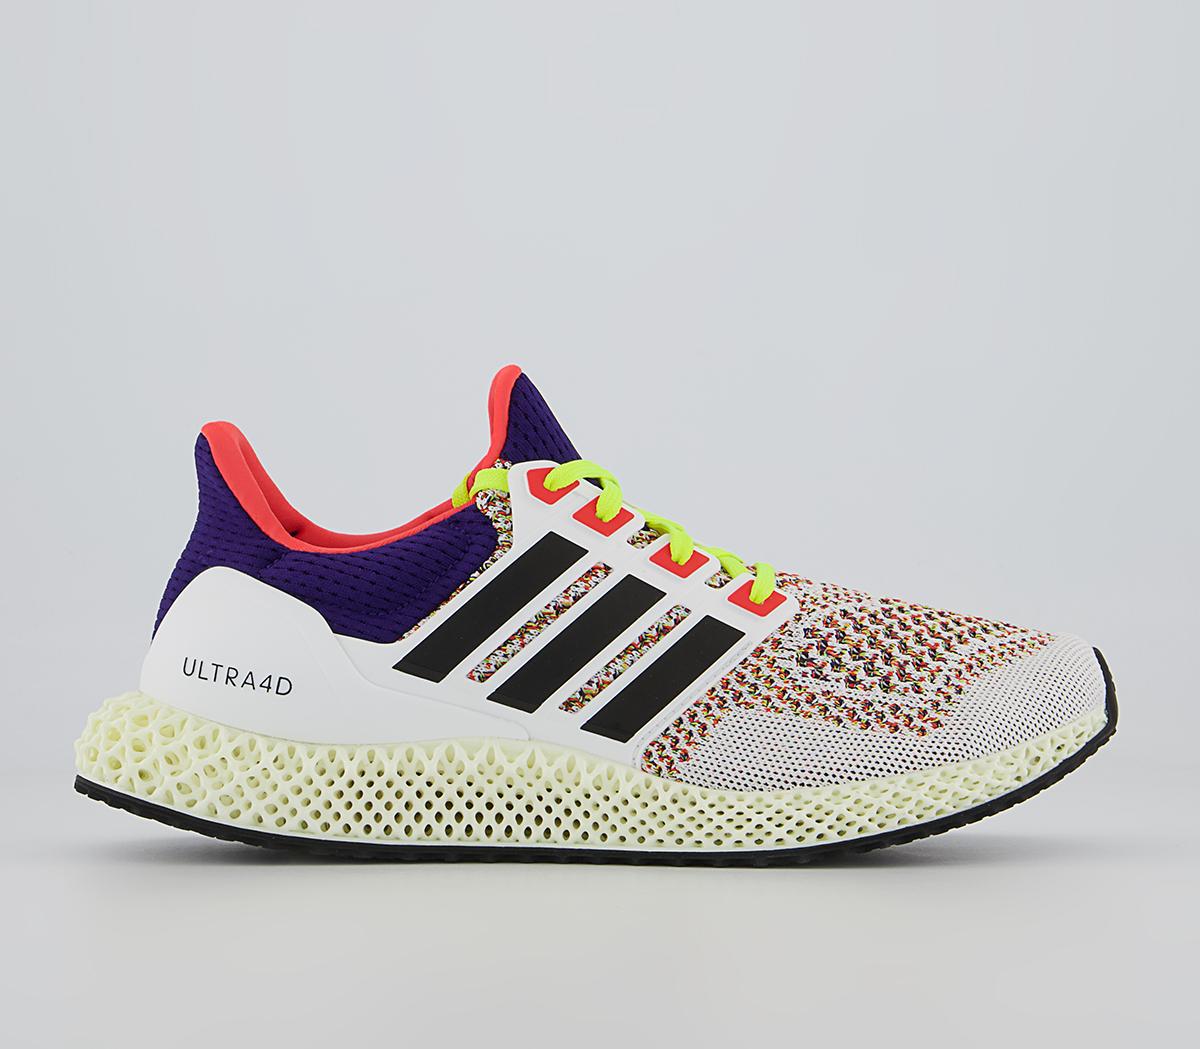 adidas UltraboostUltra4d TrainersWhite Core Black Solar Red